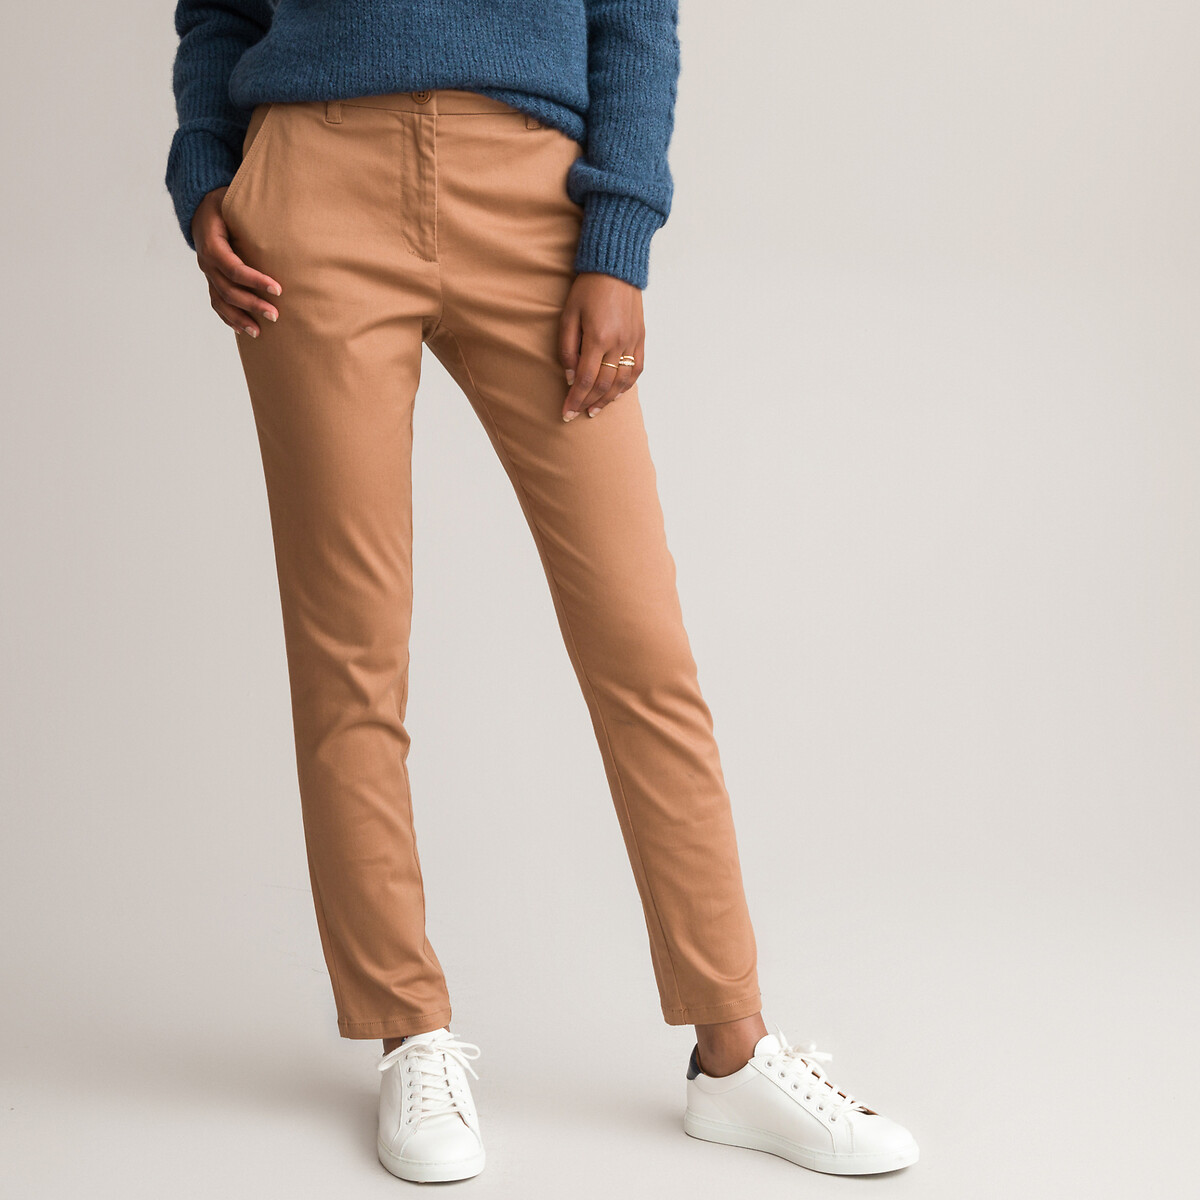 Image of Straight Stretch Cotton Chinos, Length 27.5"